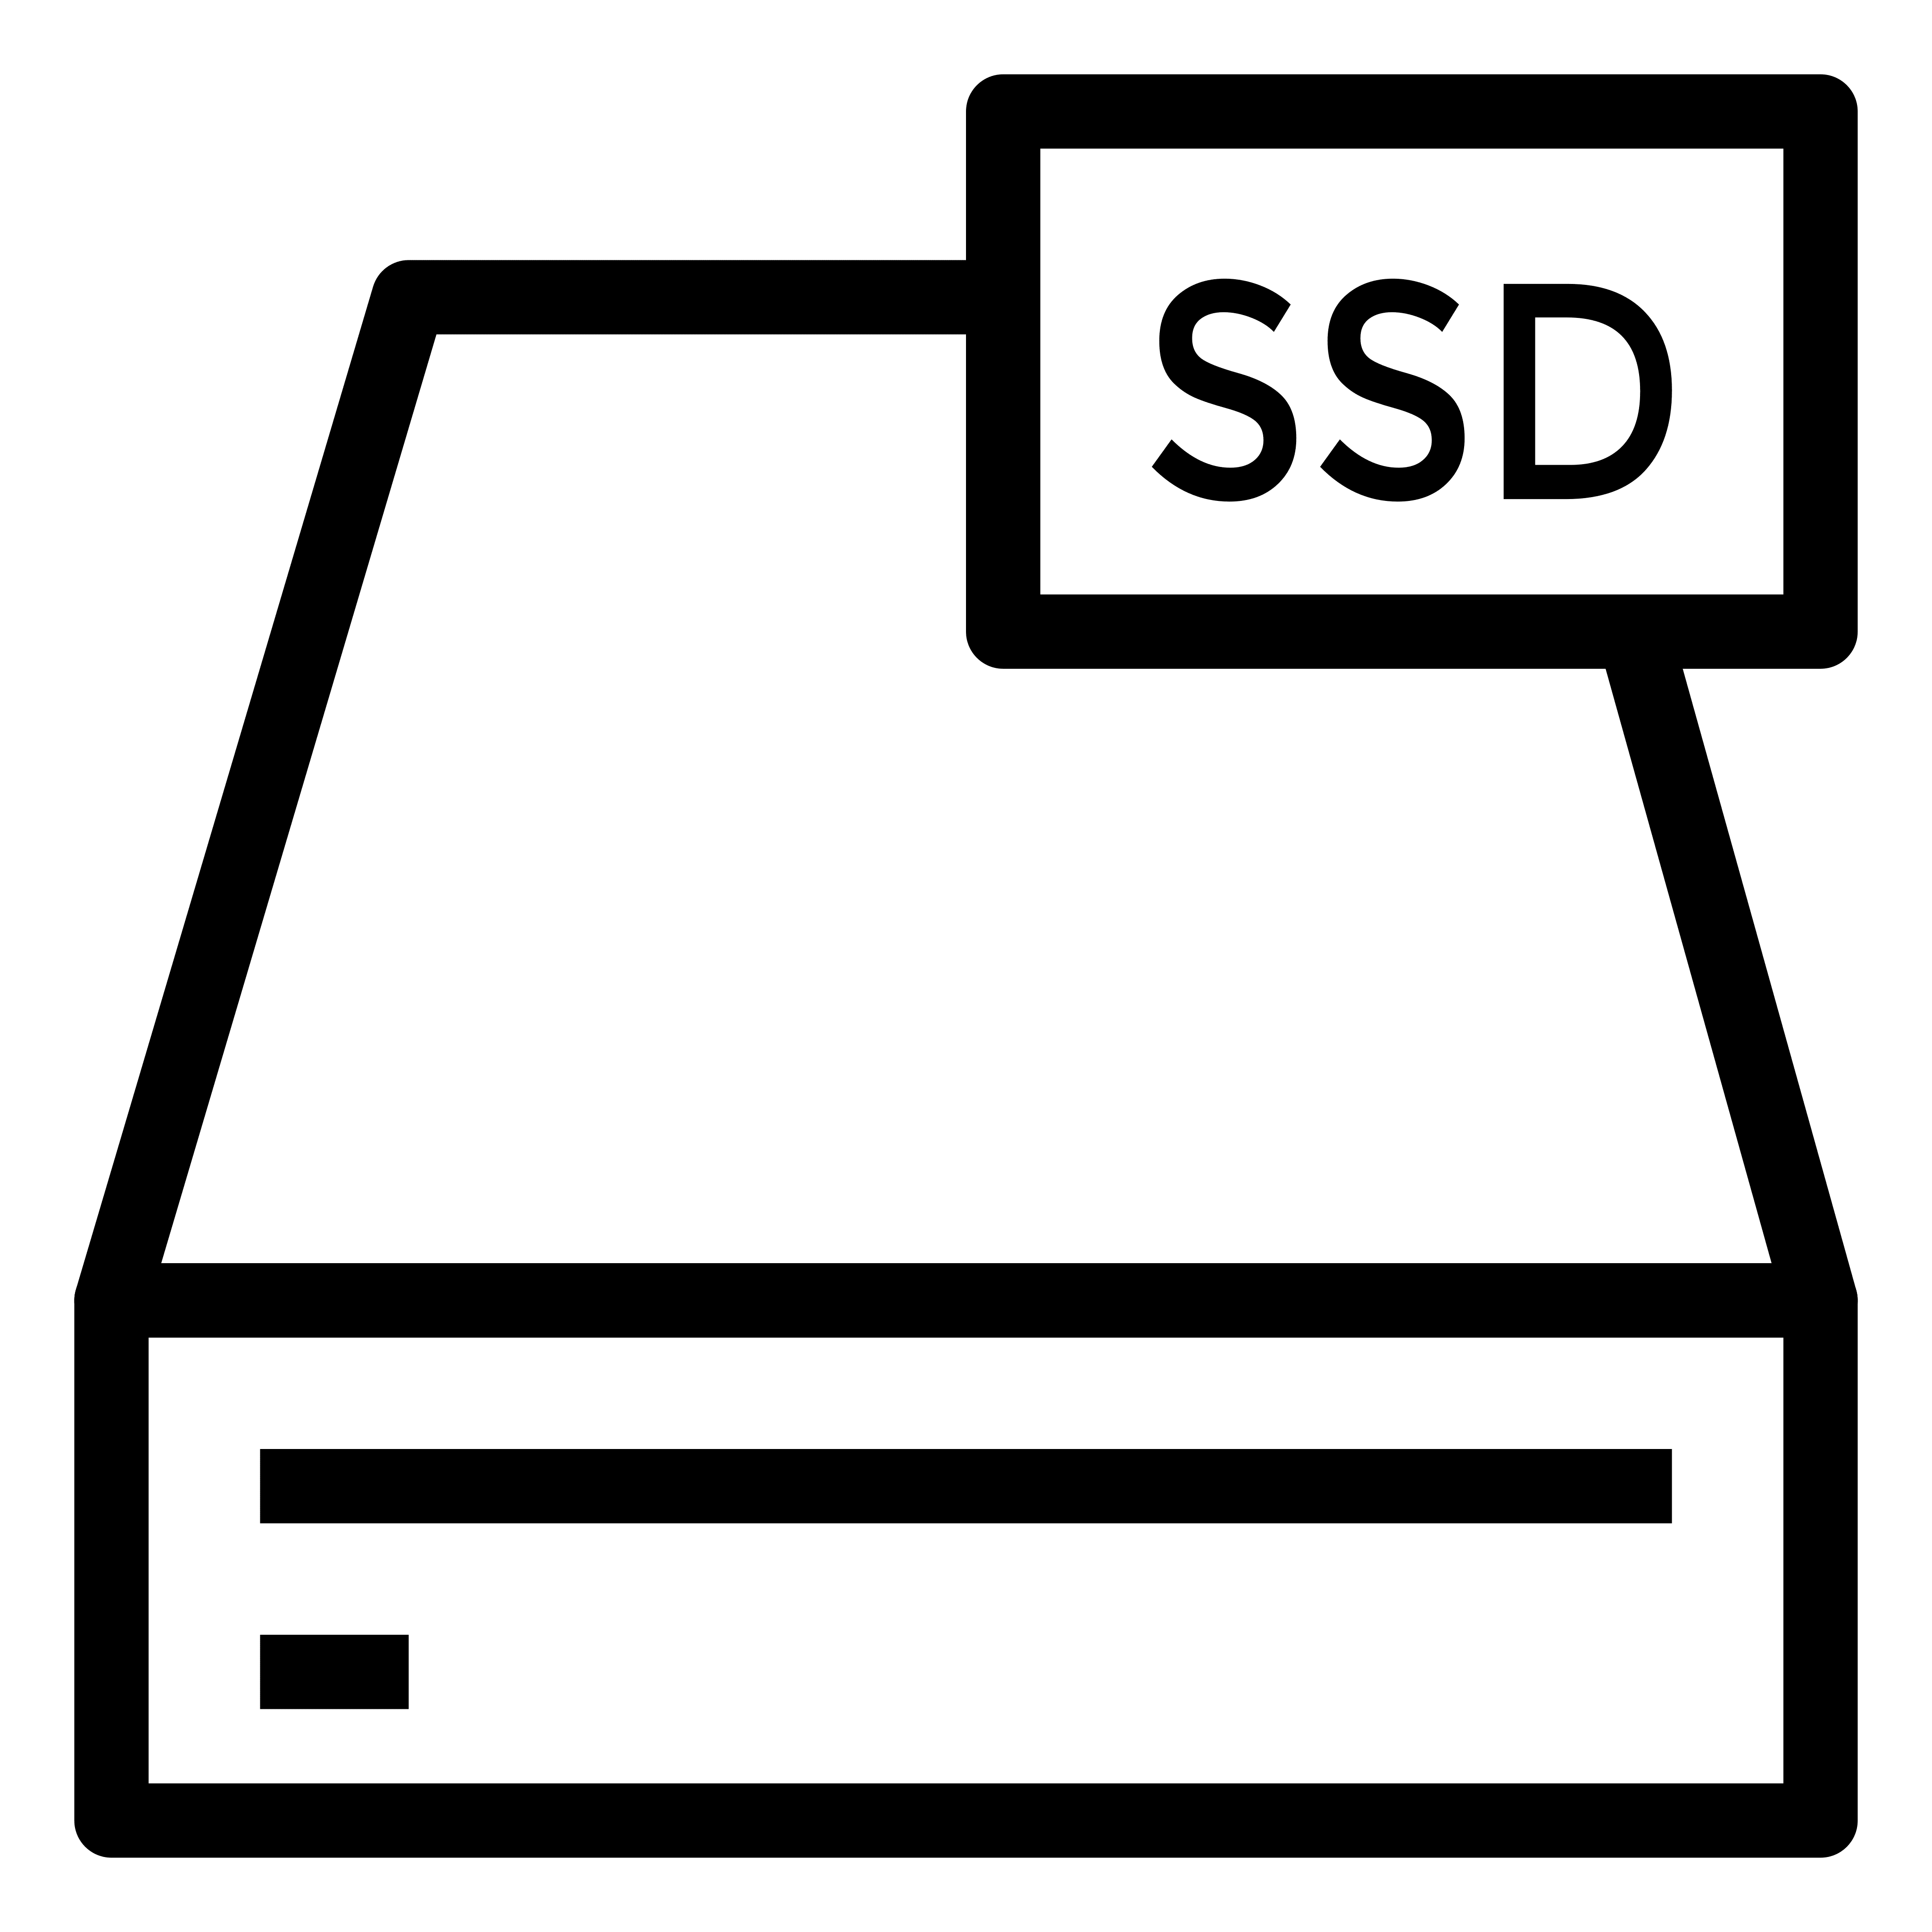 icon of a ssd in black lines